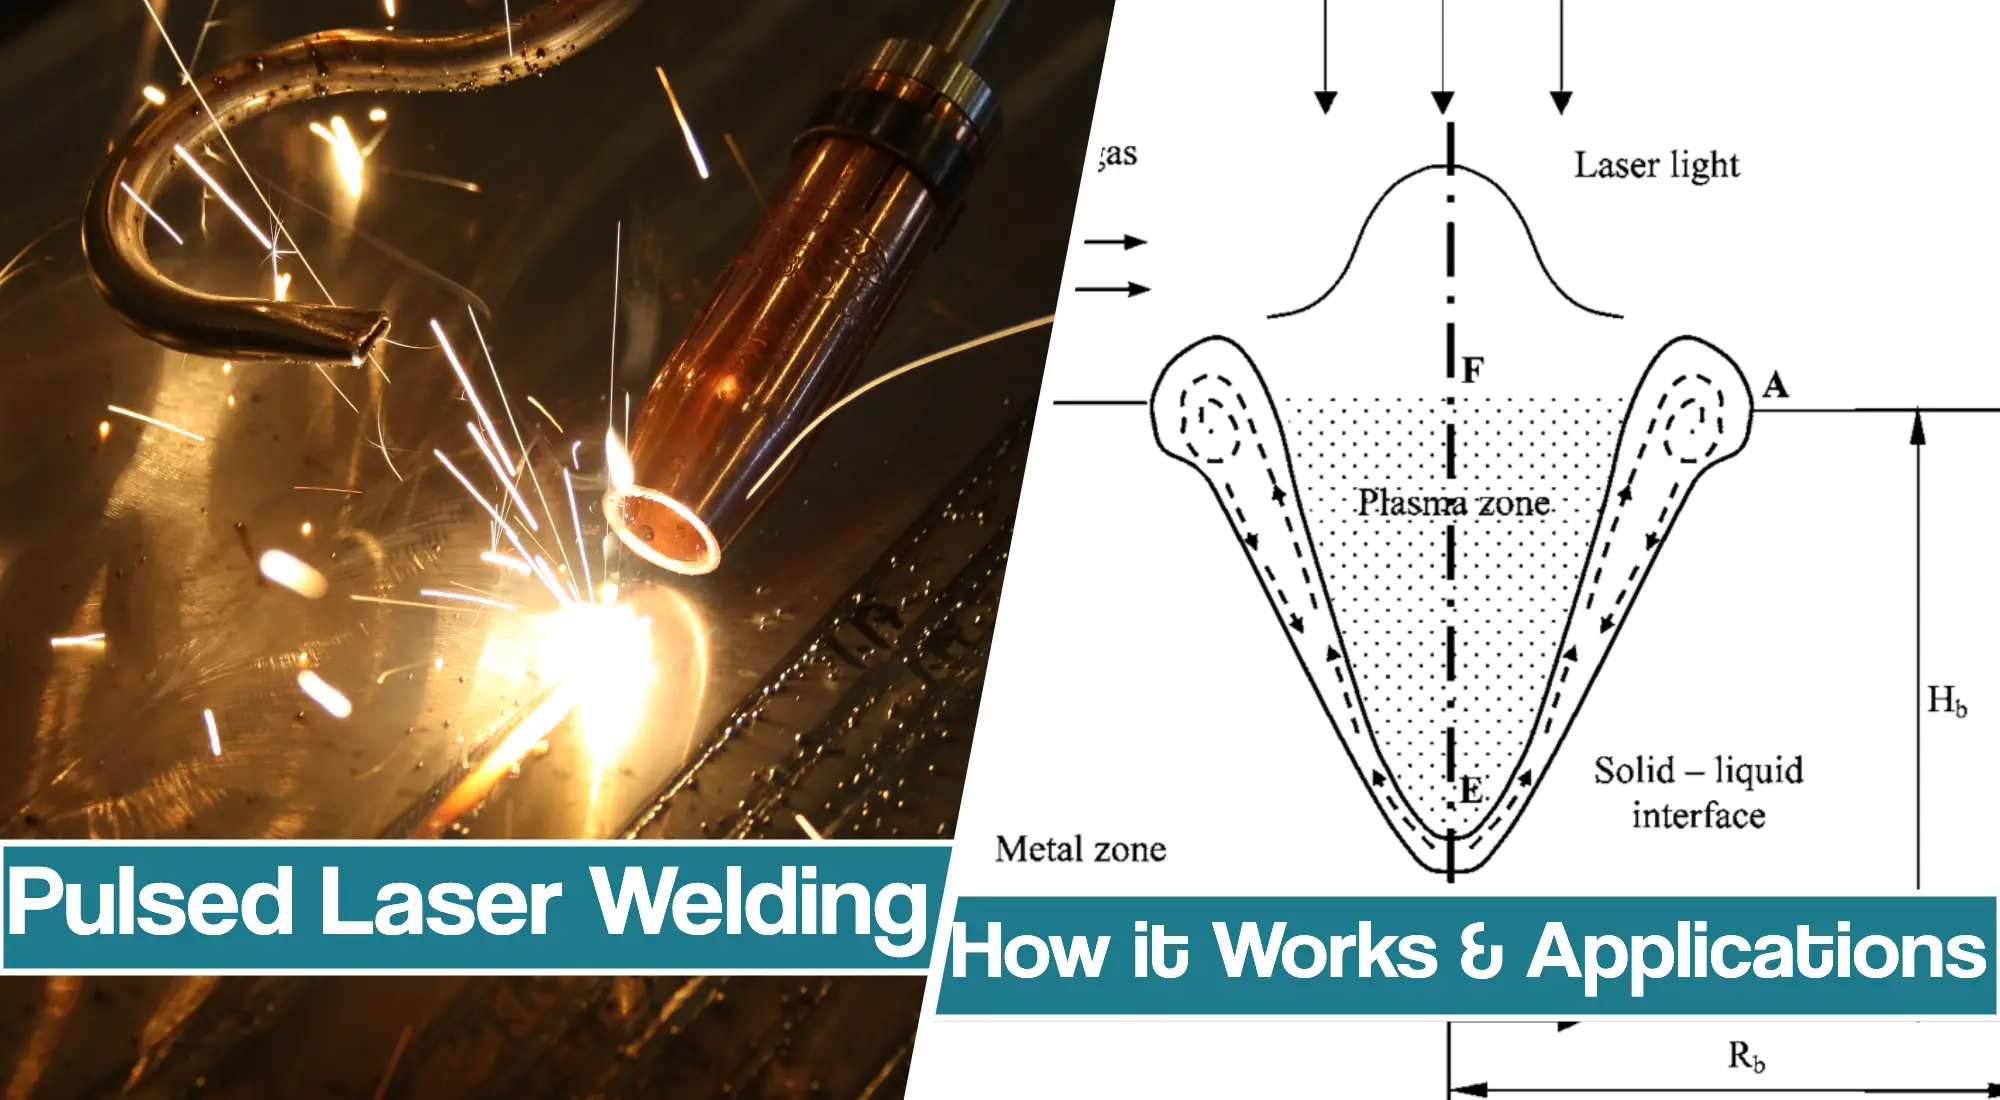 How Pulsed Laser Welding Works and Applications